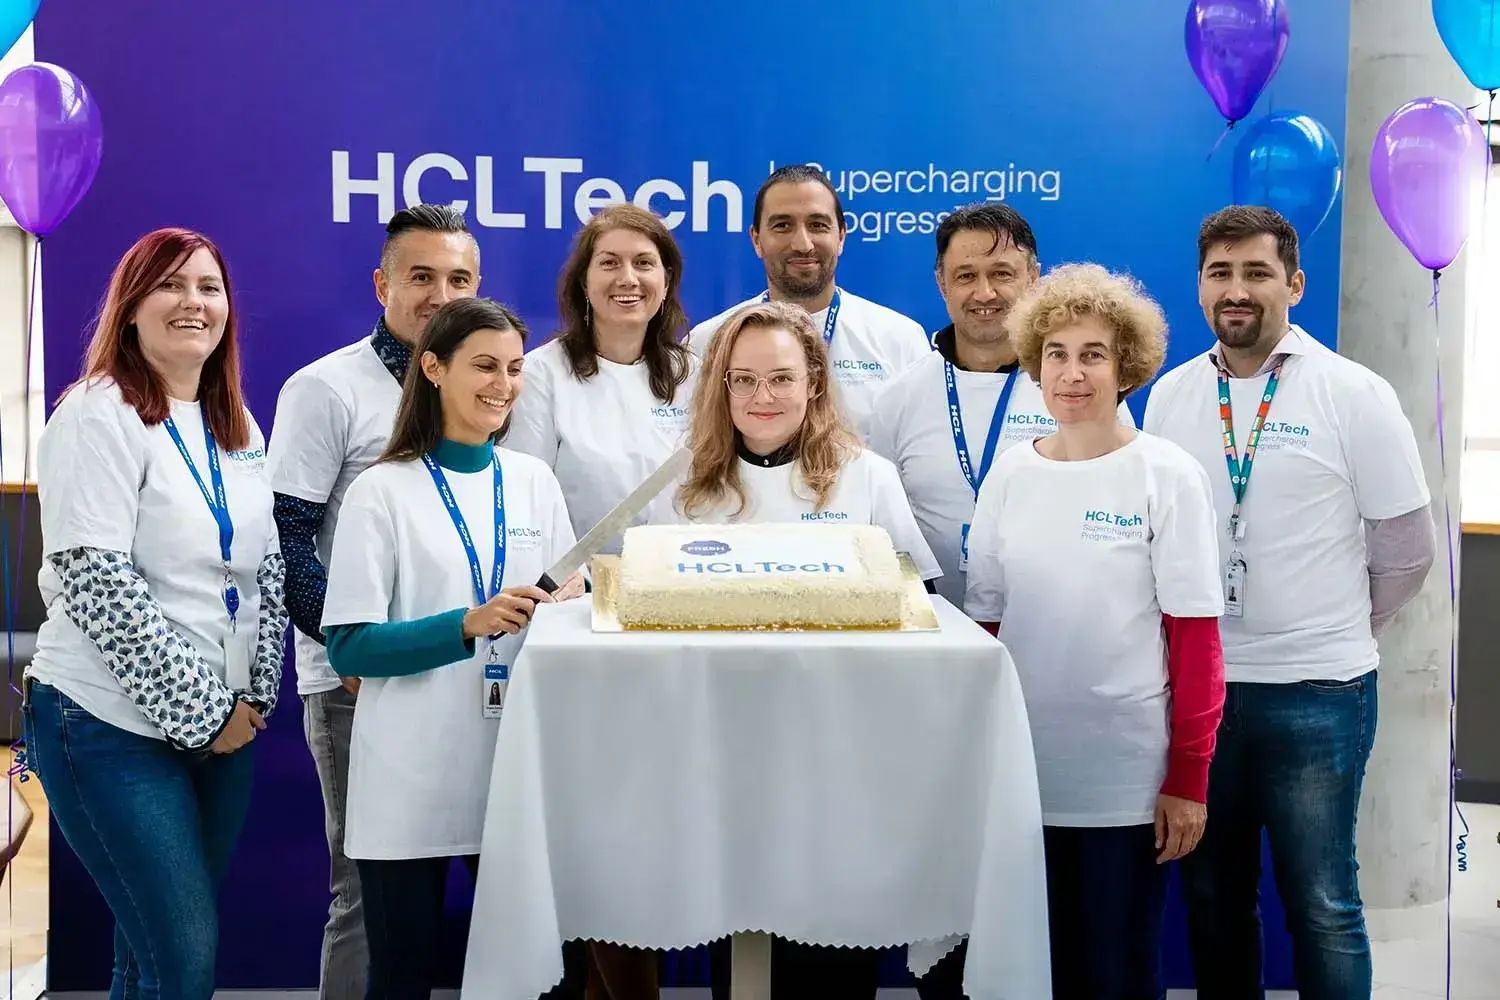 Cake-cutting at HCLTech Brand Transformation in Sofia